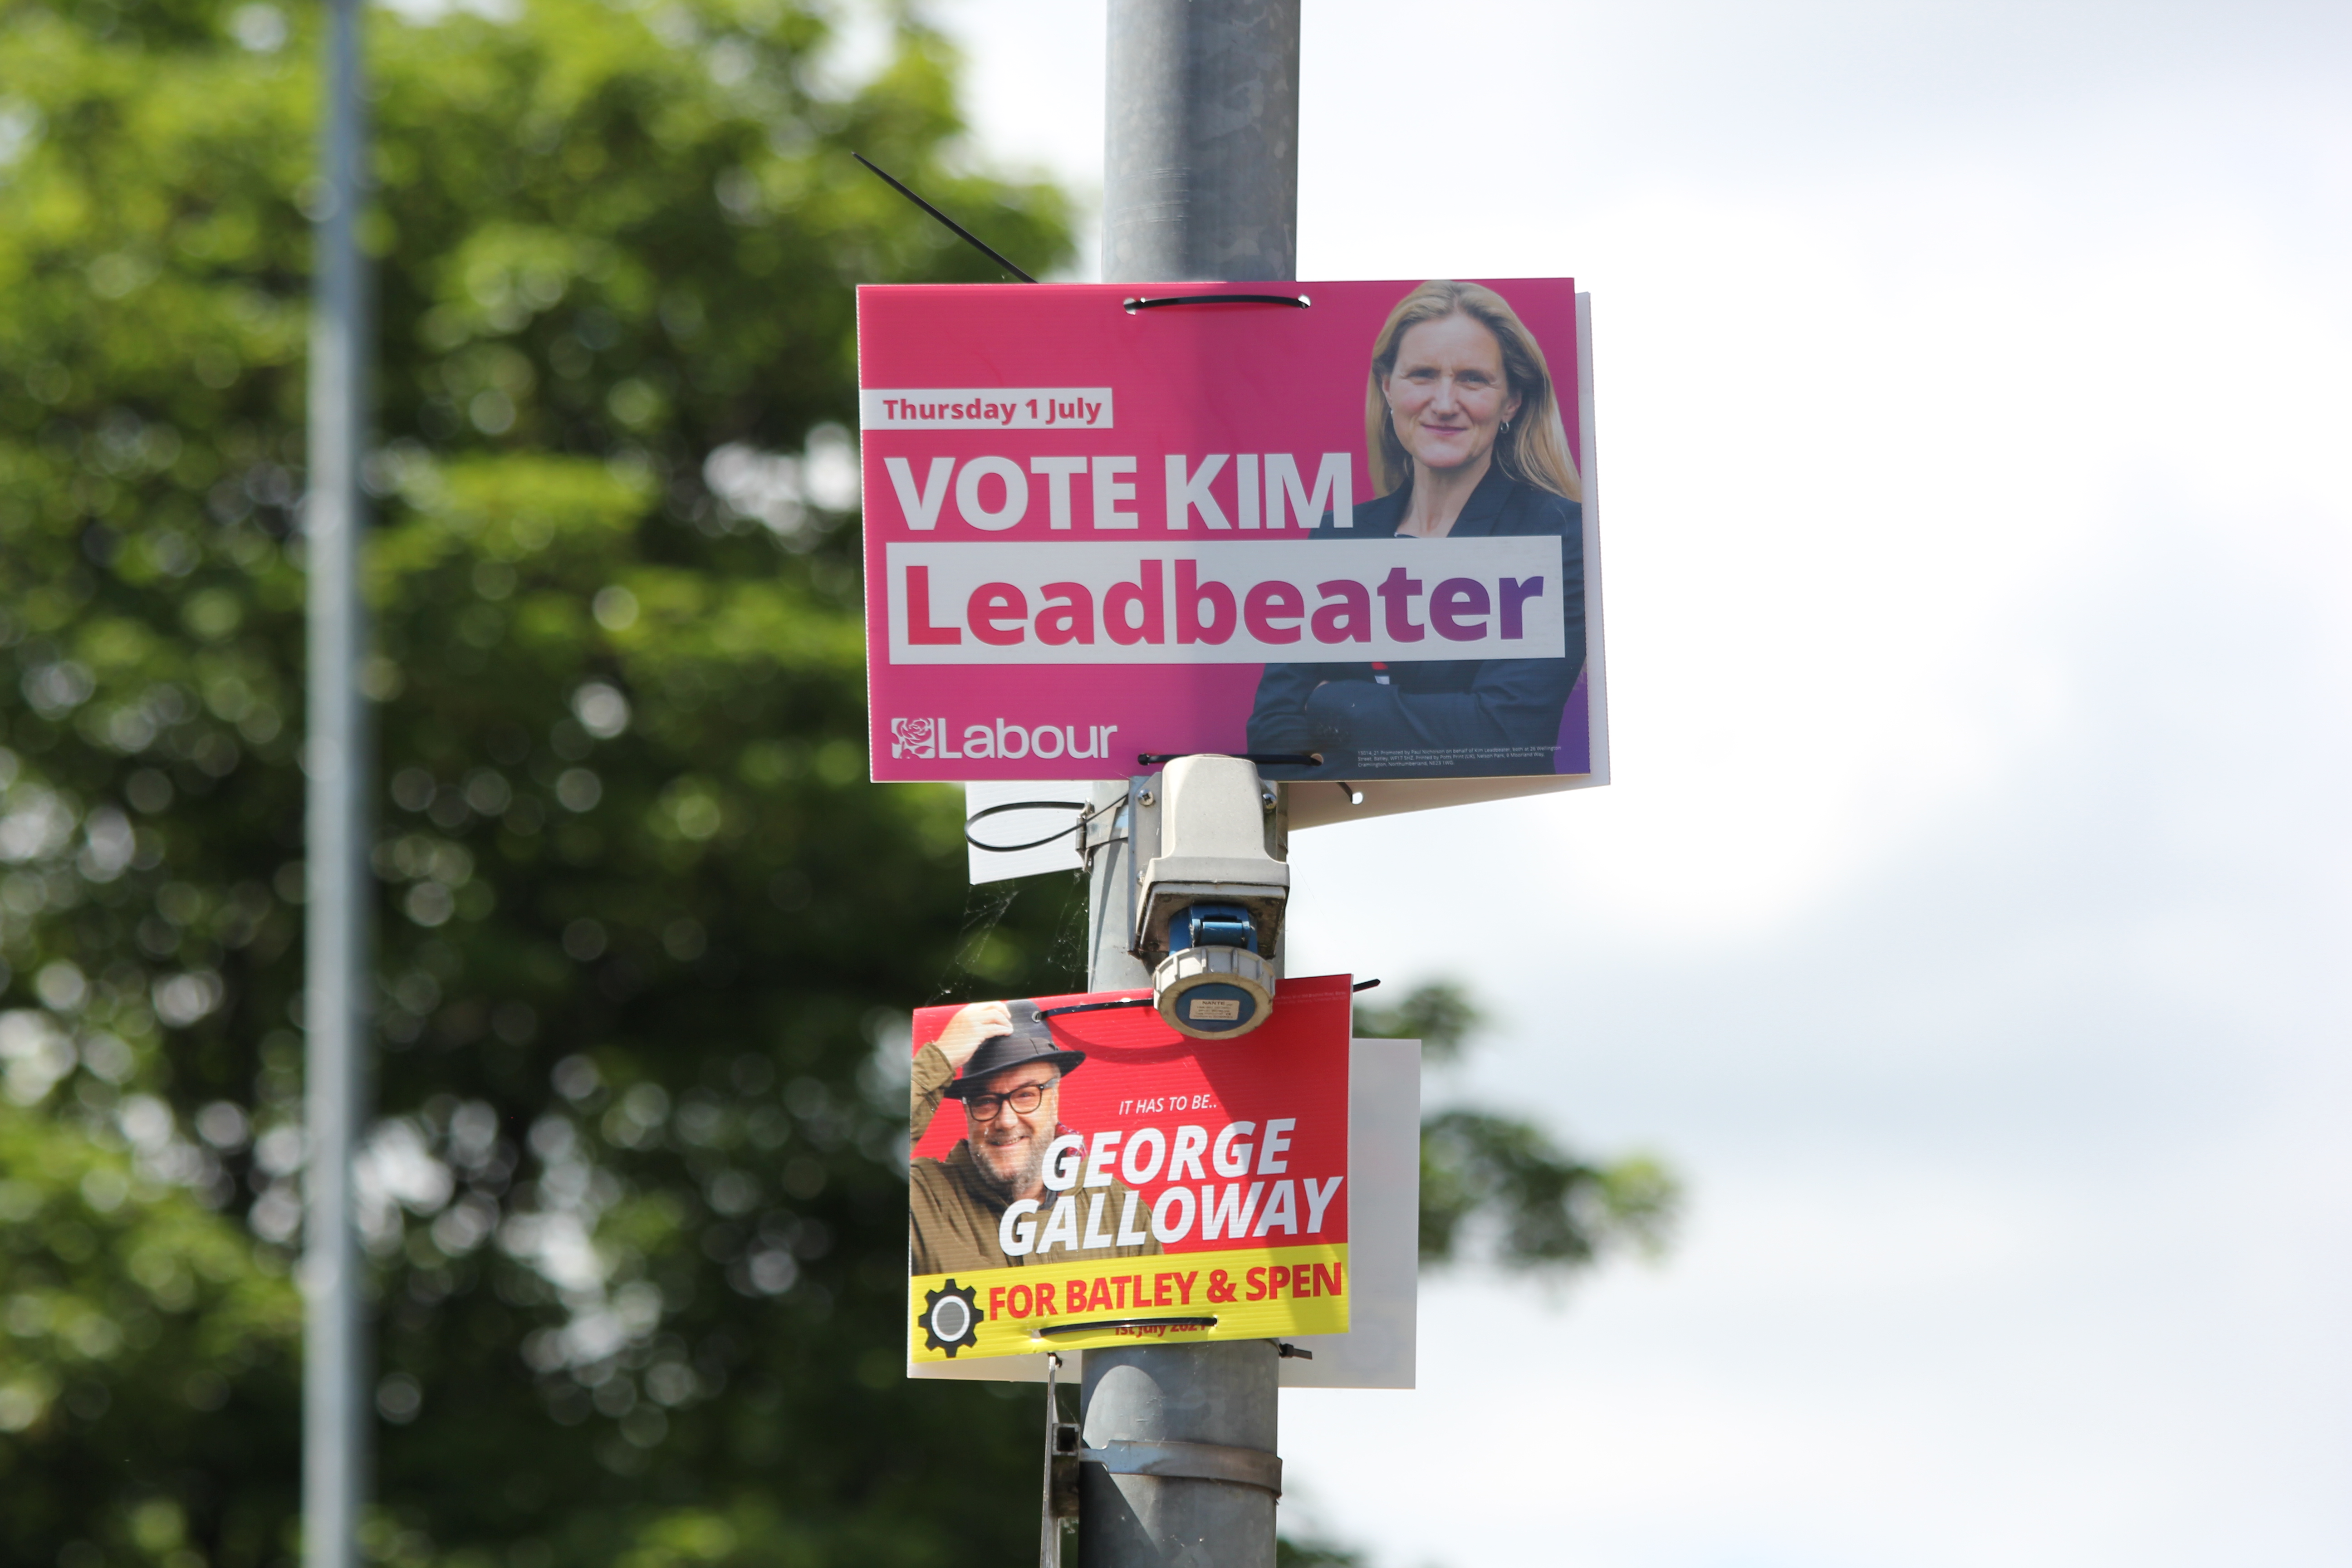 Kim Leadbetter and George Galloway campaign posters, candidates for Labour and the Workers Party of Britain respectively (MEE/Alex MacDonald)